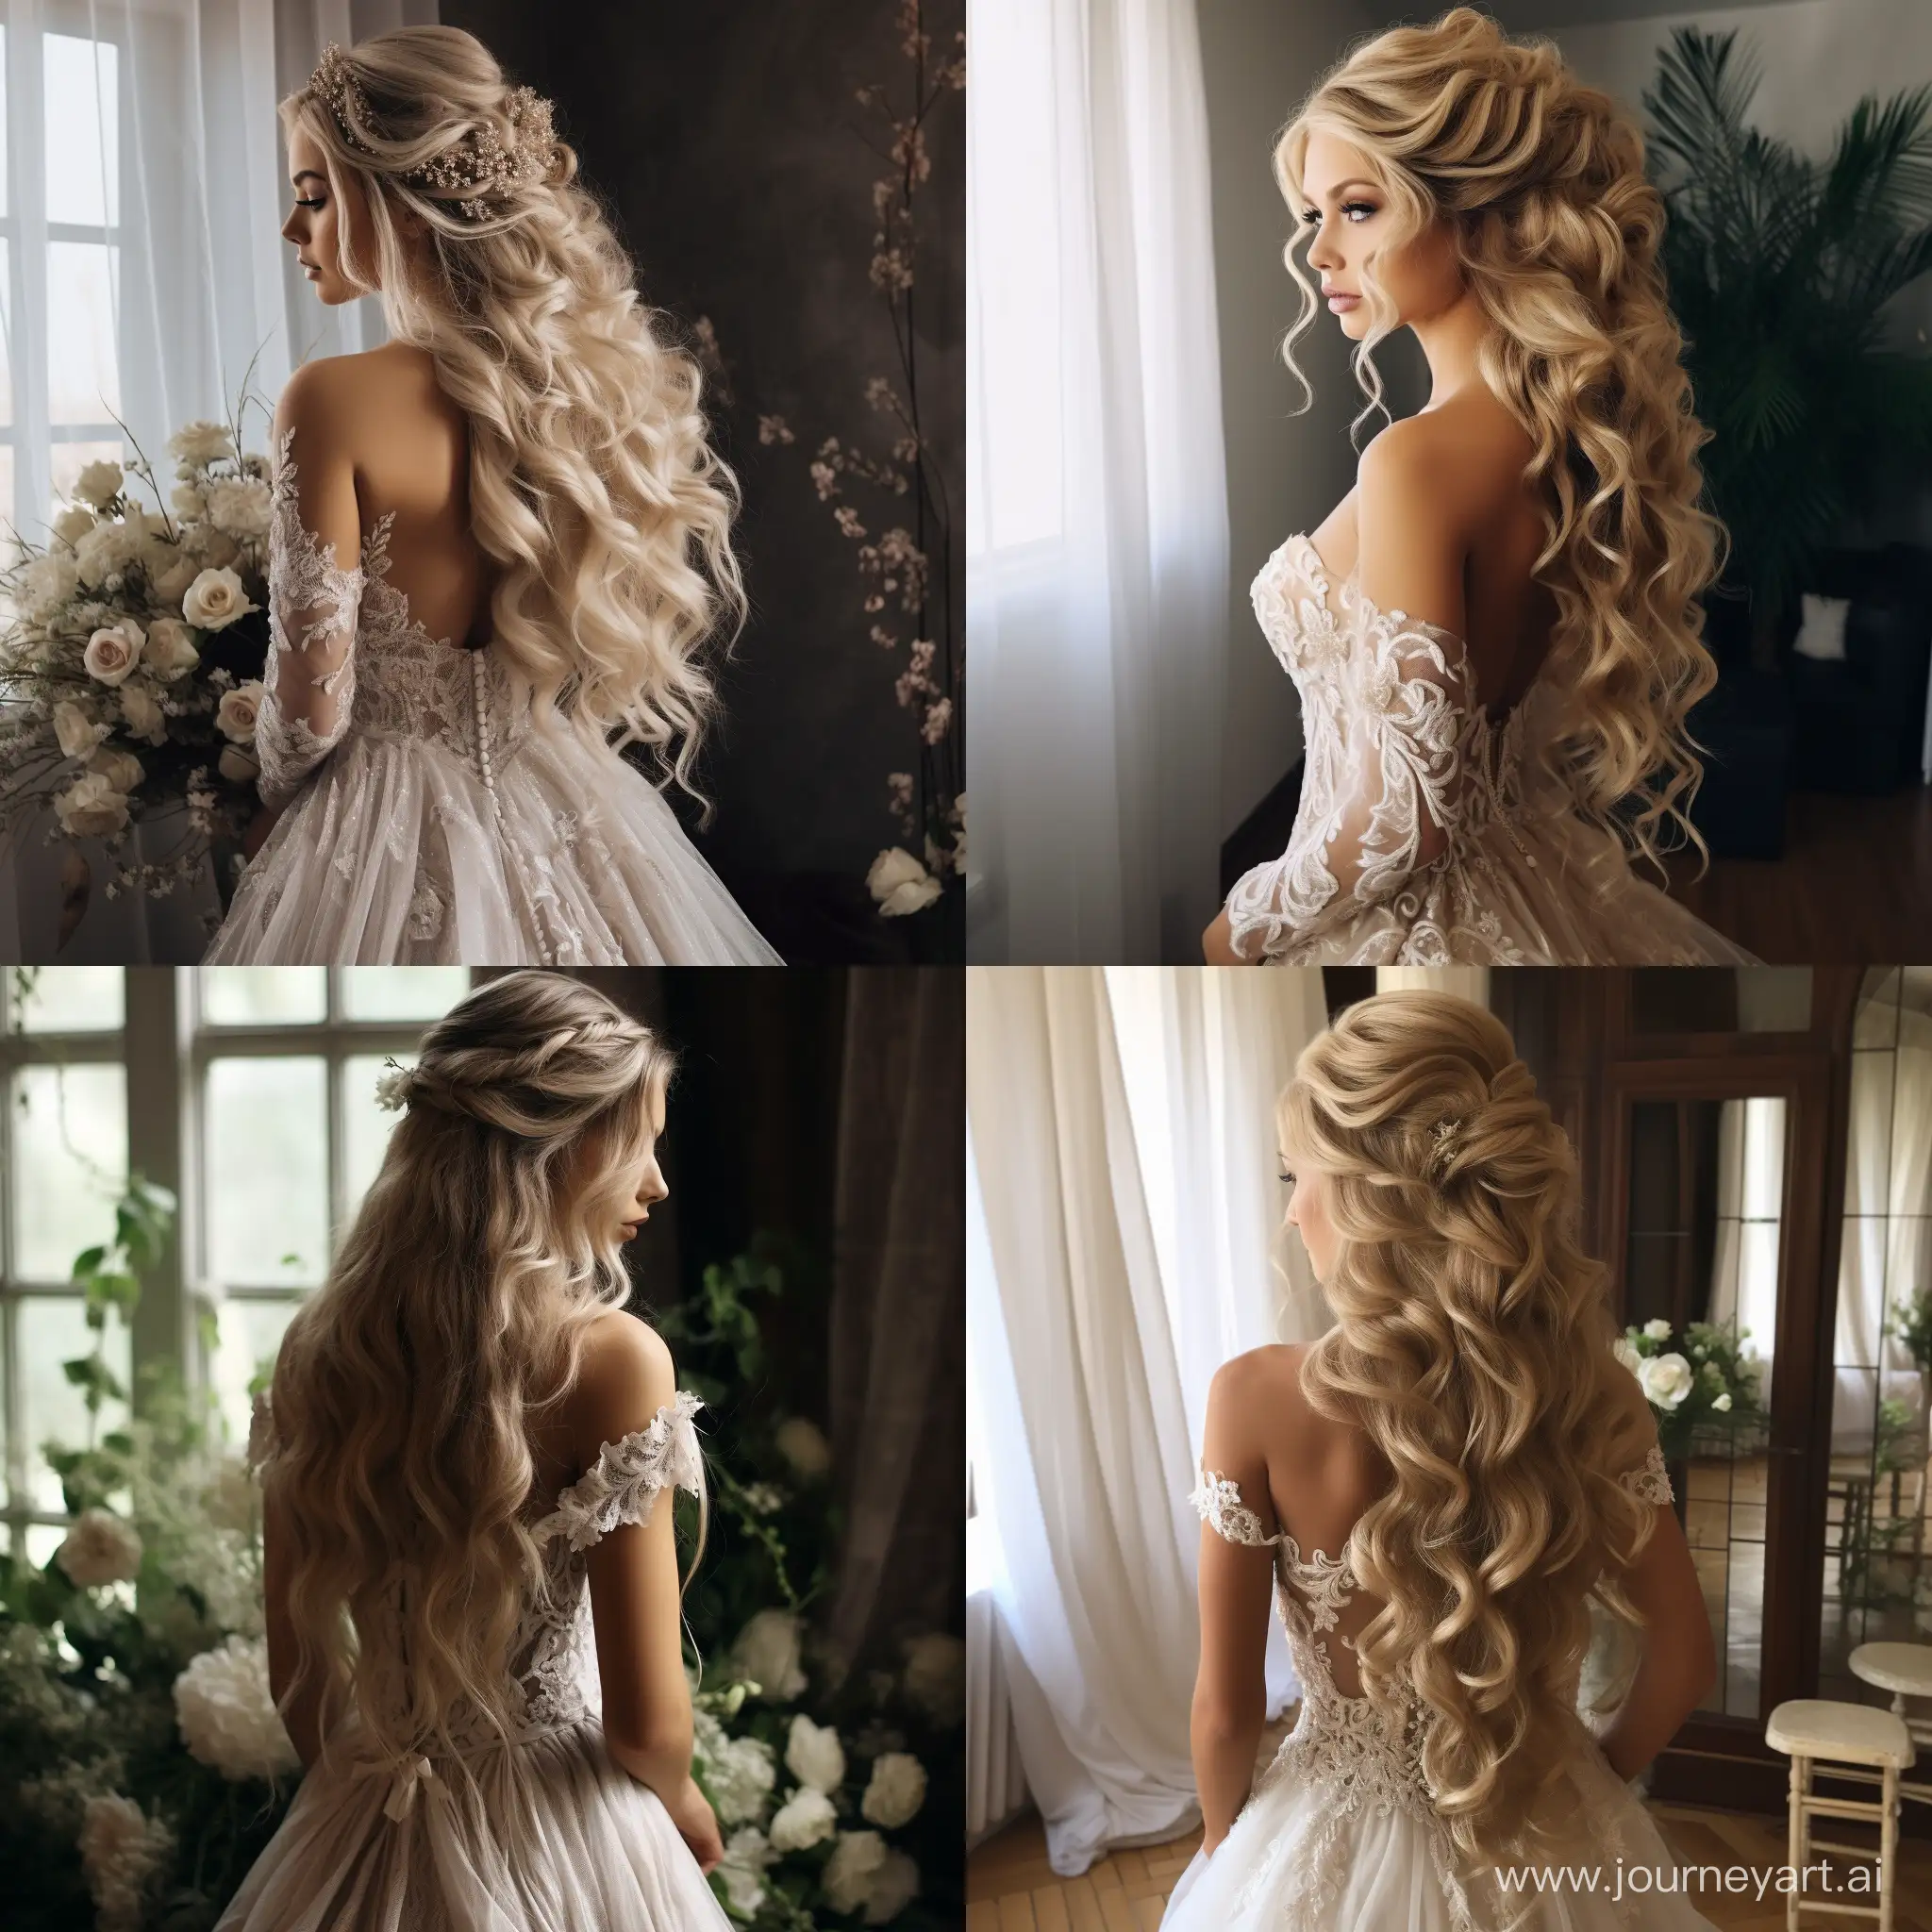 Breathtaking-Bride-with-Spectacular-Blond-Hair-on-Wedding-Day